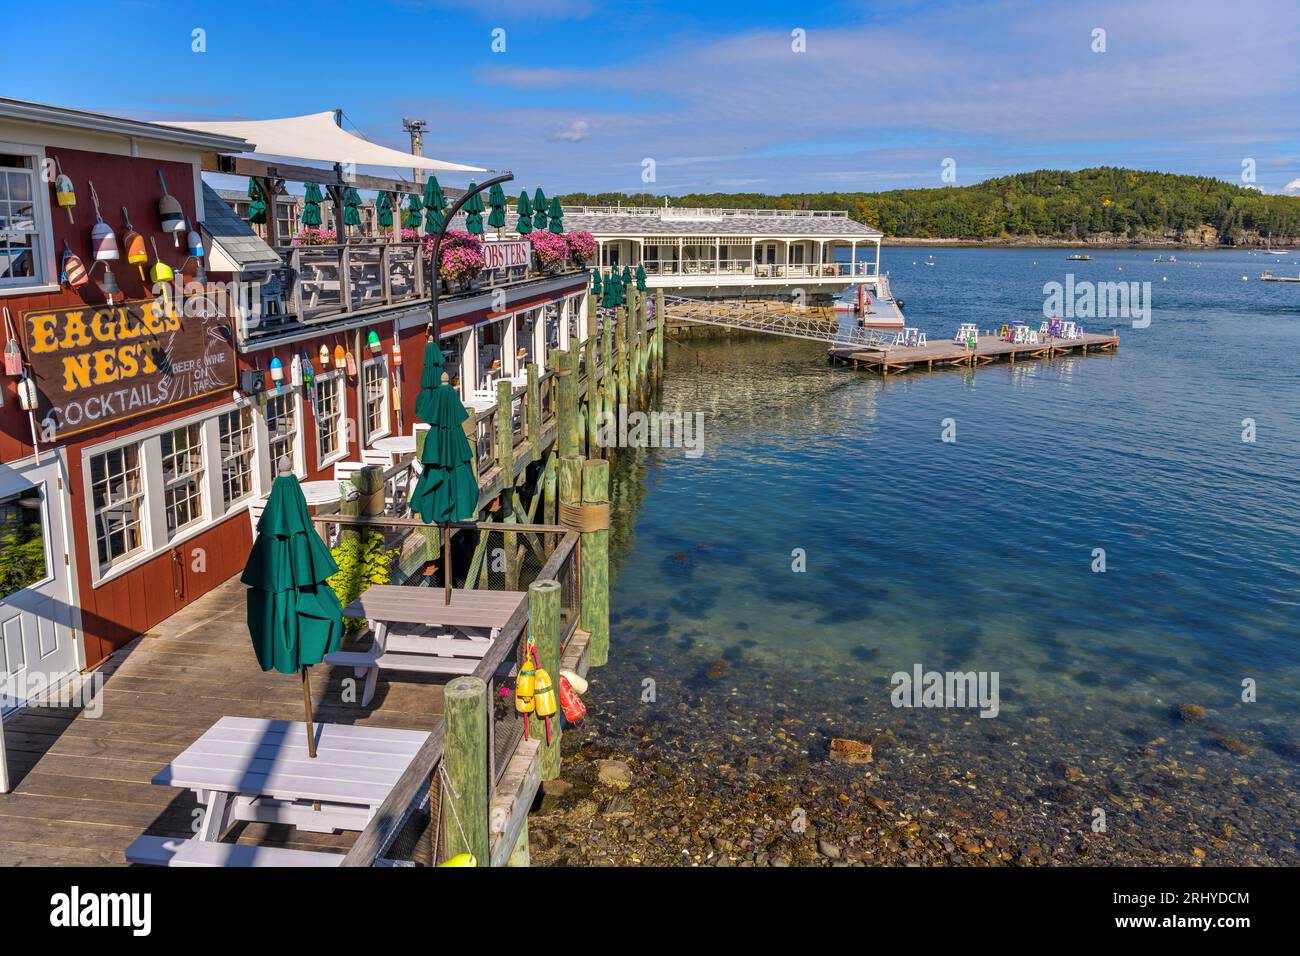 Bar Harbor Pier - A sunny Autumn morning view of a commercial pier at shore of Frenchman Bay. Bar Harbor, Mount Desert Island, Maine, USA. Stock Photo